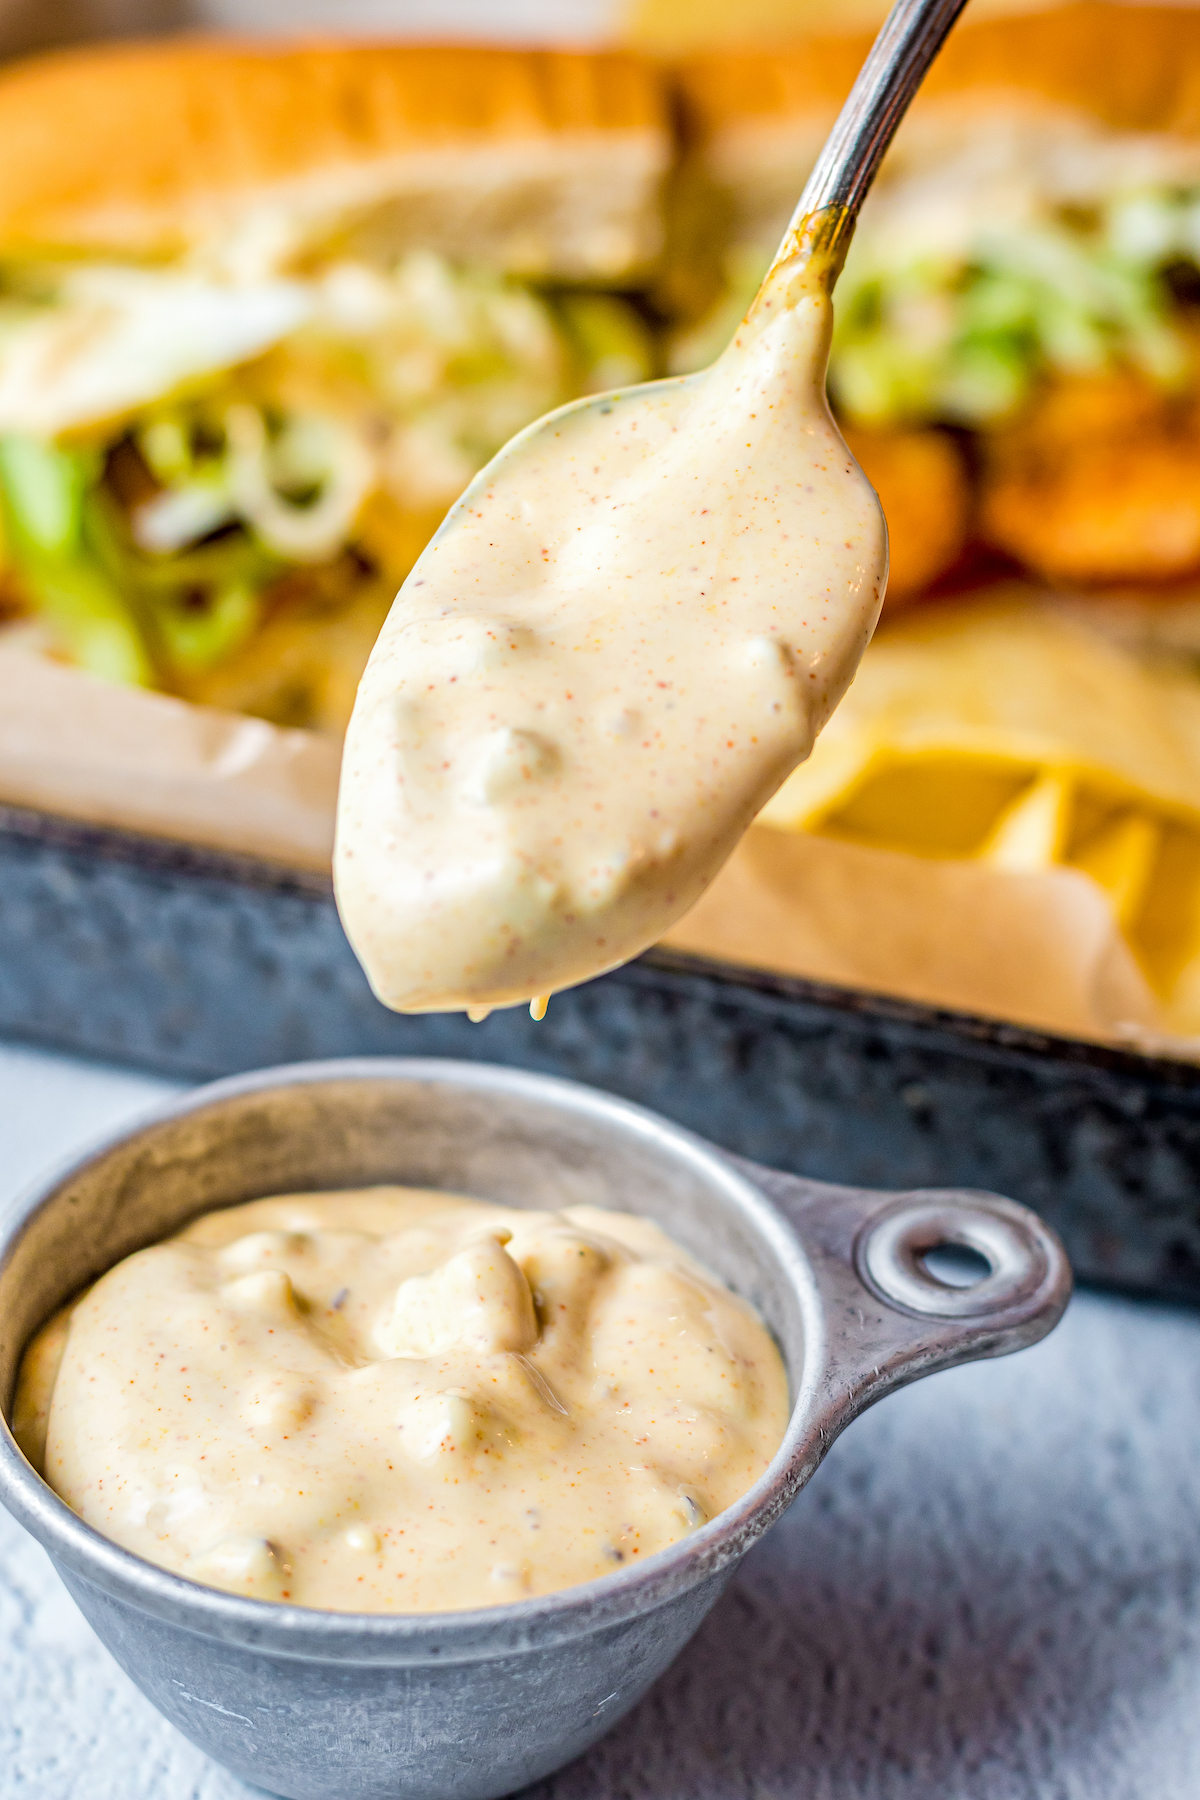 Remoulade sauce in a small dish. A spoon is lifting some of the sauce toward the camera.